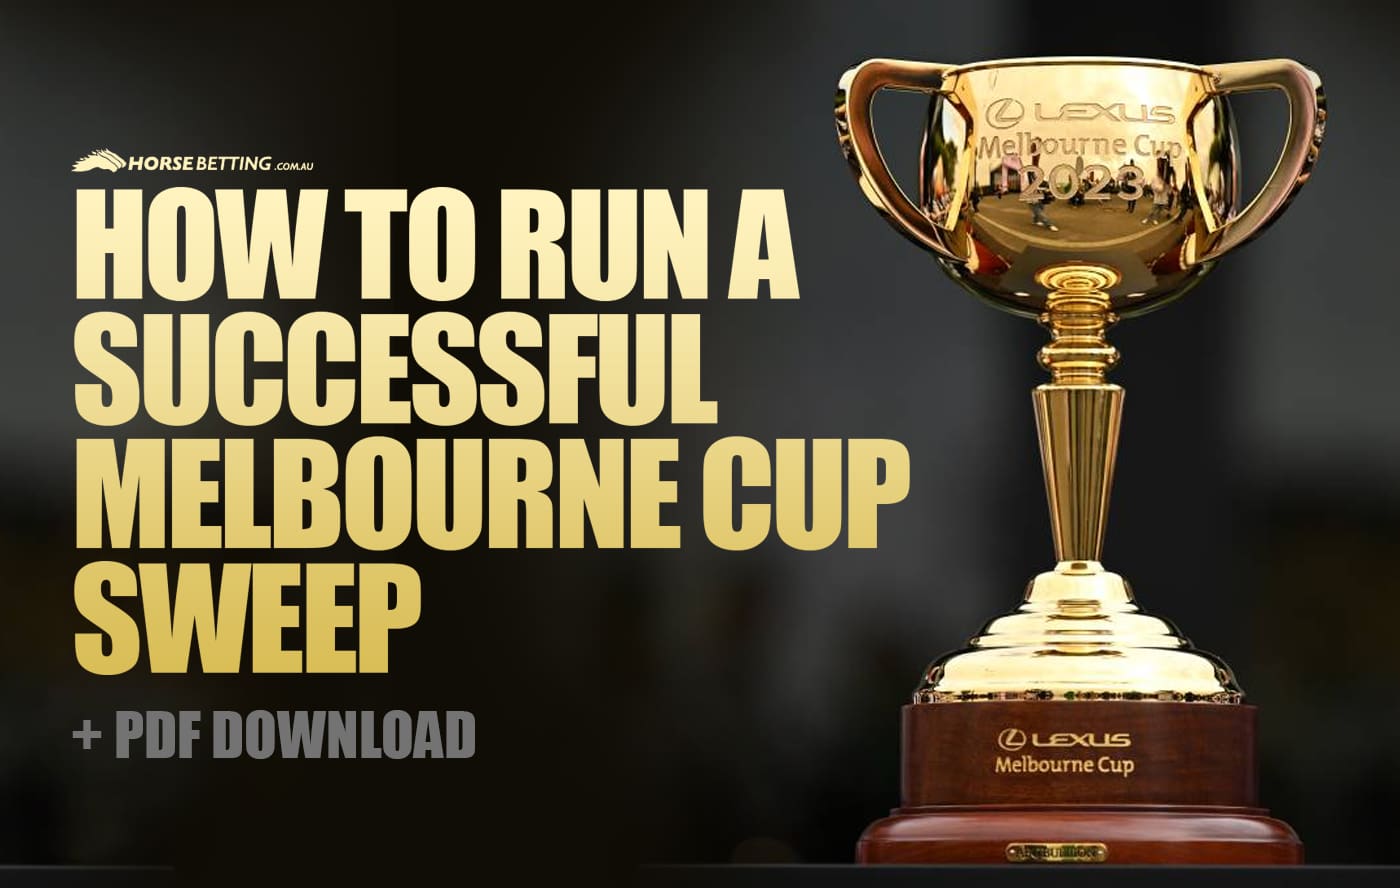 How to run a successful Melbourne Cup sweep